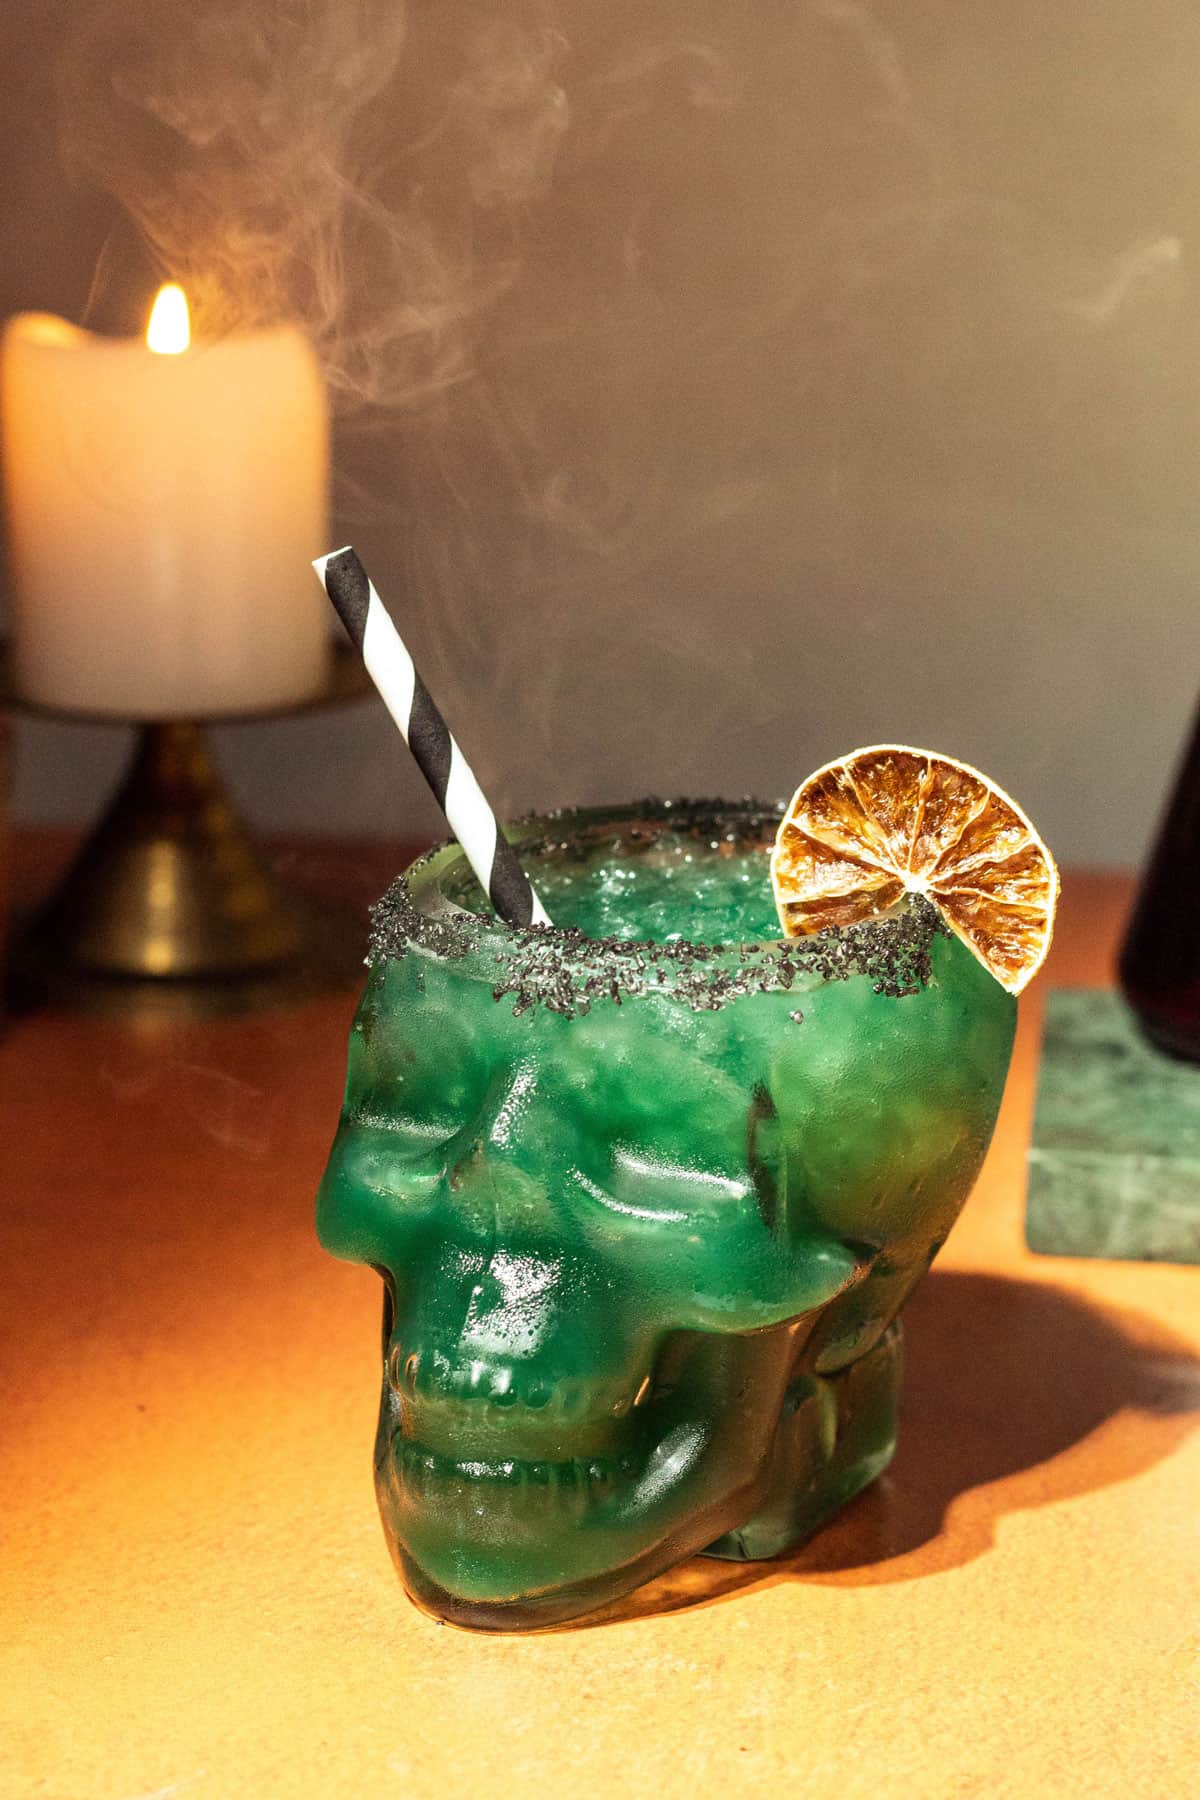 Green margarita in a skull glass with a dried lime and black/white straw for garnish.